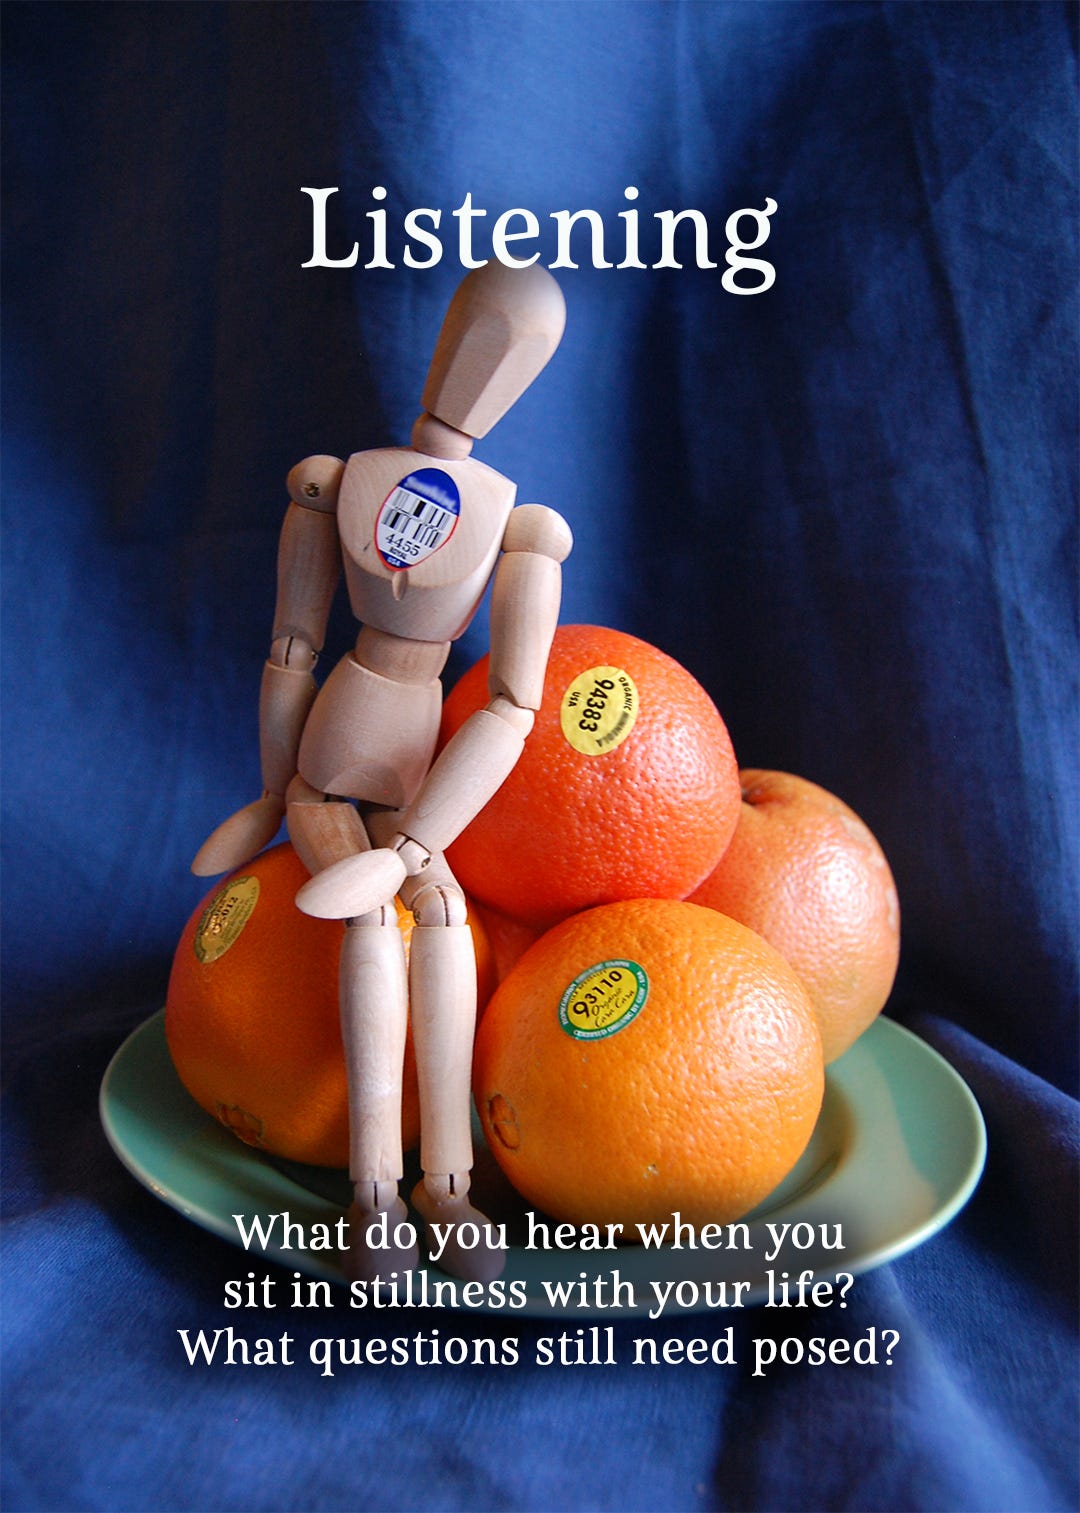 The Emotikin is sitting among a stack of oranges on a green plate, blue linen background, a quintessential still life portrait, only the manikin and oranges all have bar code labels from the grocery store. The image is titled Listening and the questions say What do you hear when you sit in stillness with your life? What questions still need posed?